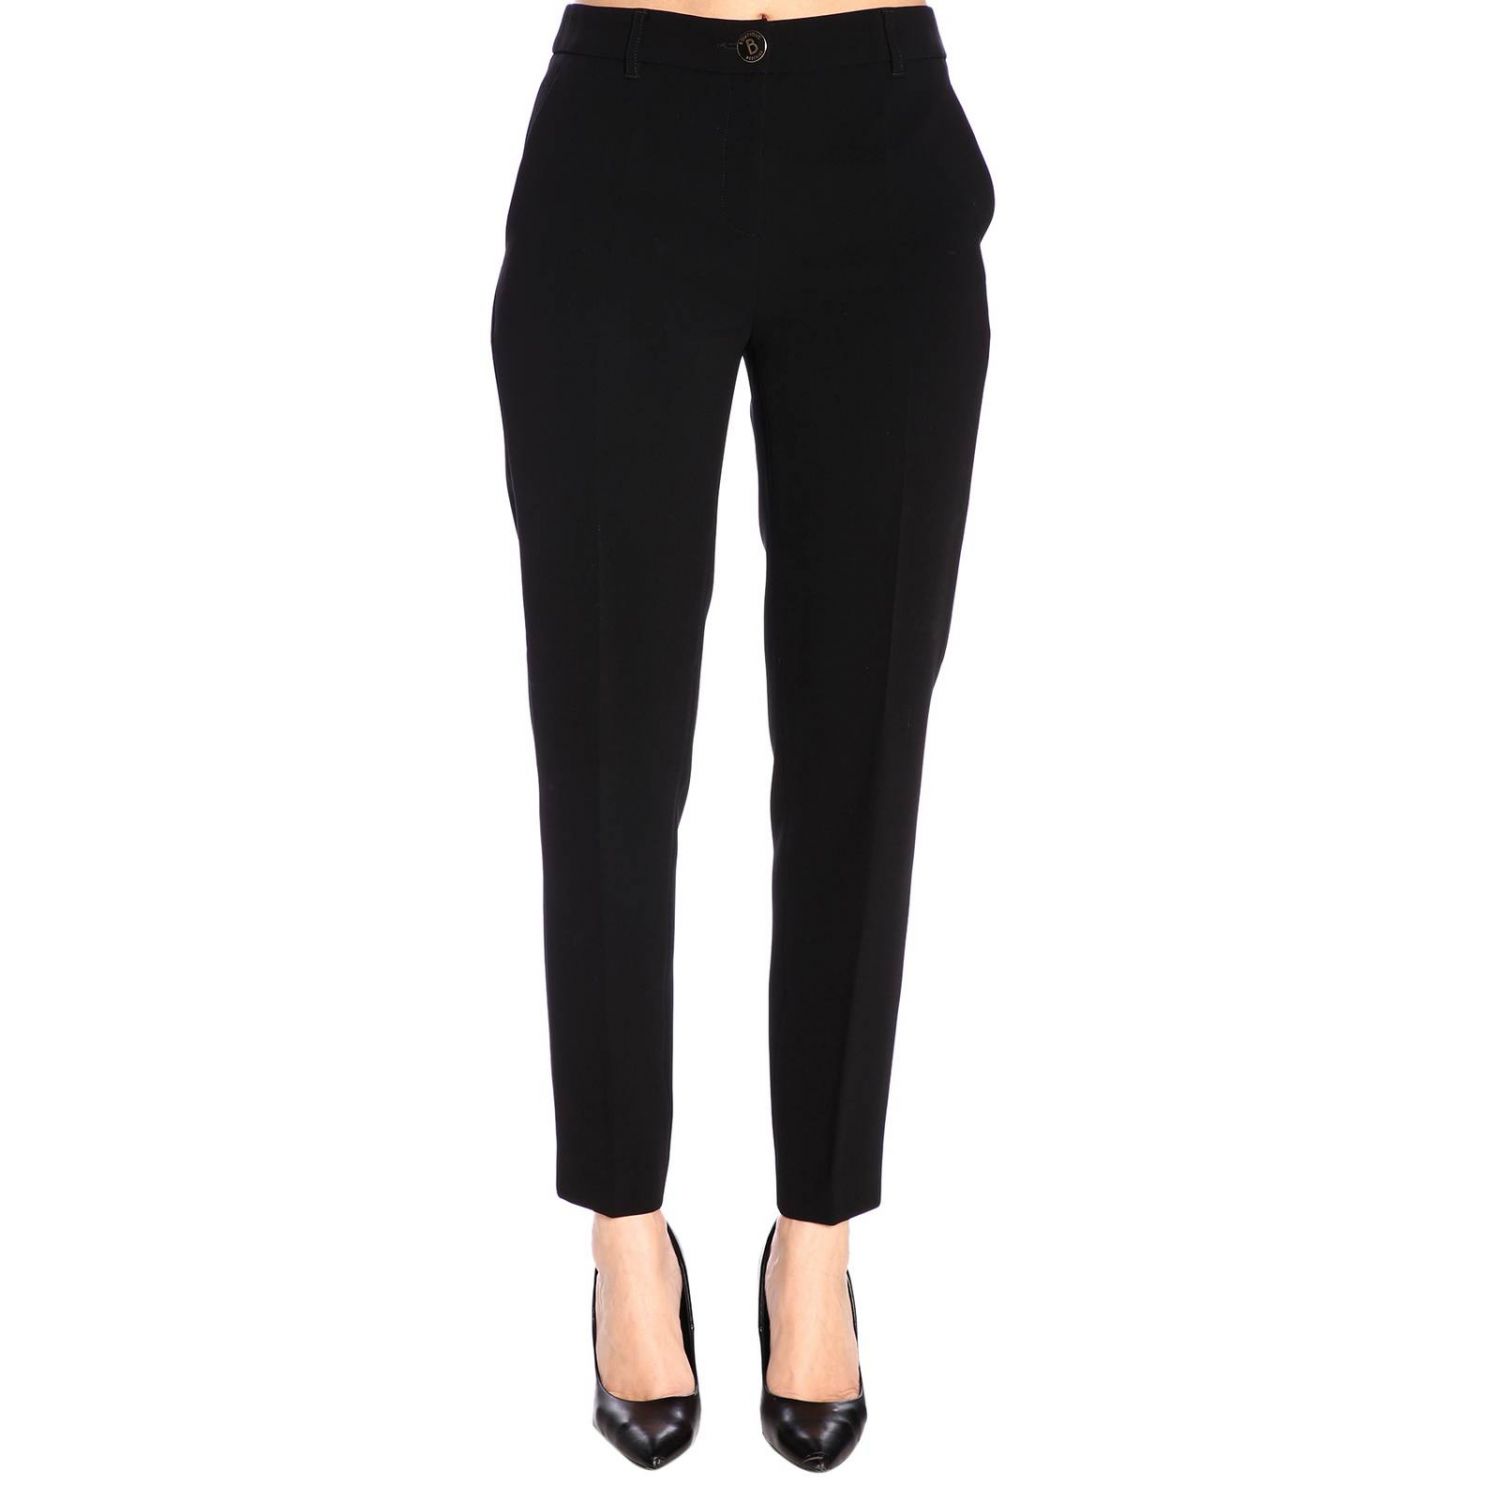 Boutique Moschino Outlet: pants for woman - Black | Boutique Moschino ...